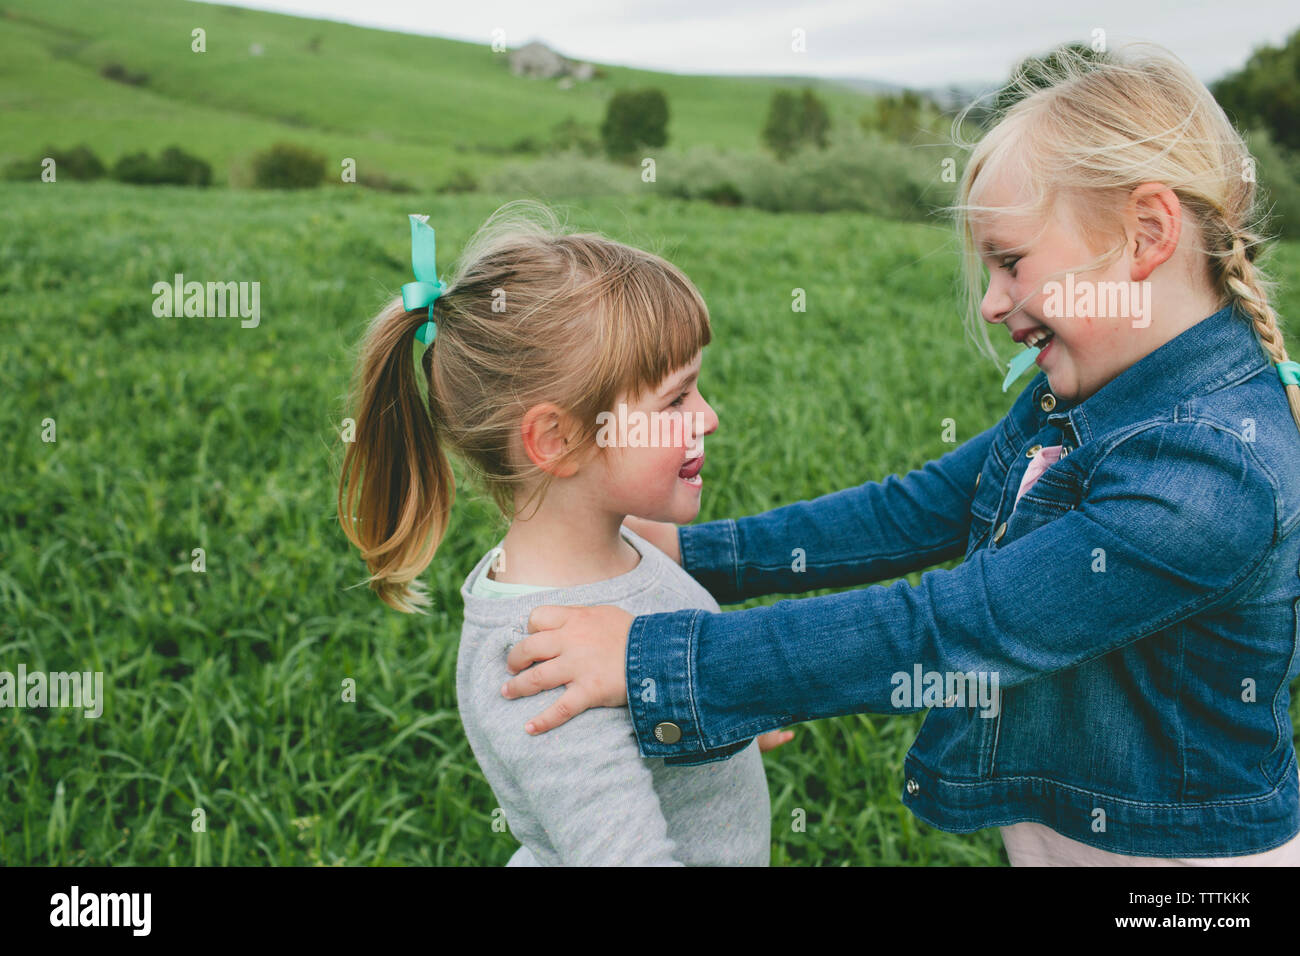 Side view of happy sisters looking at each other while standing on grassy field Stock Photo